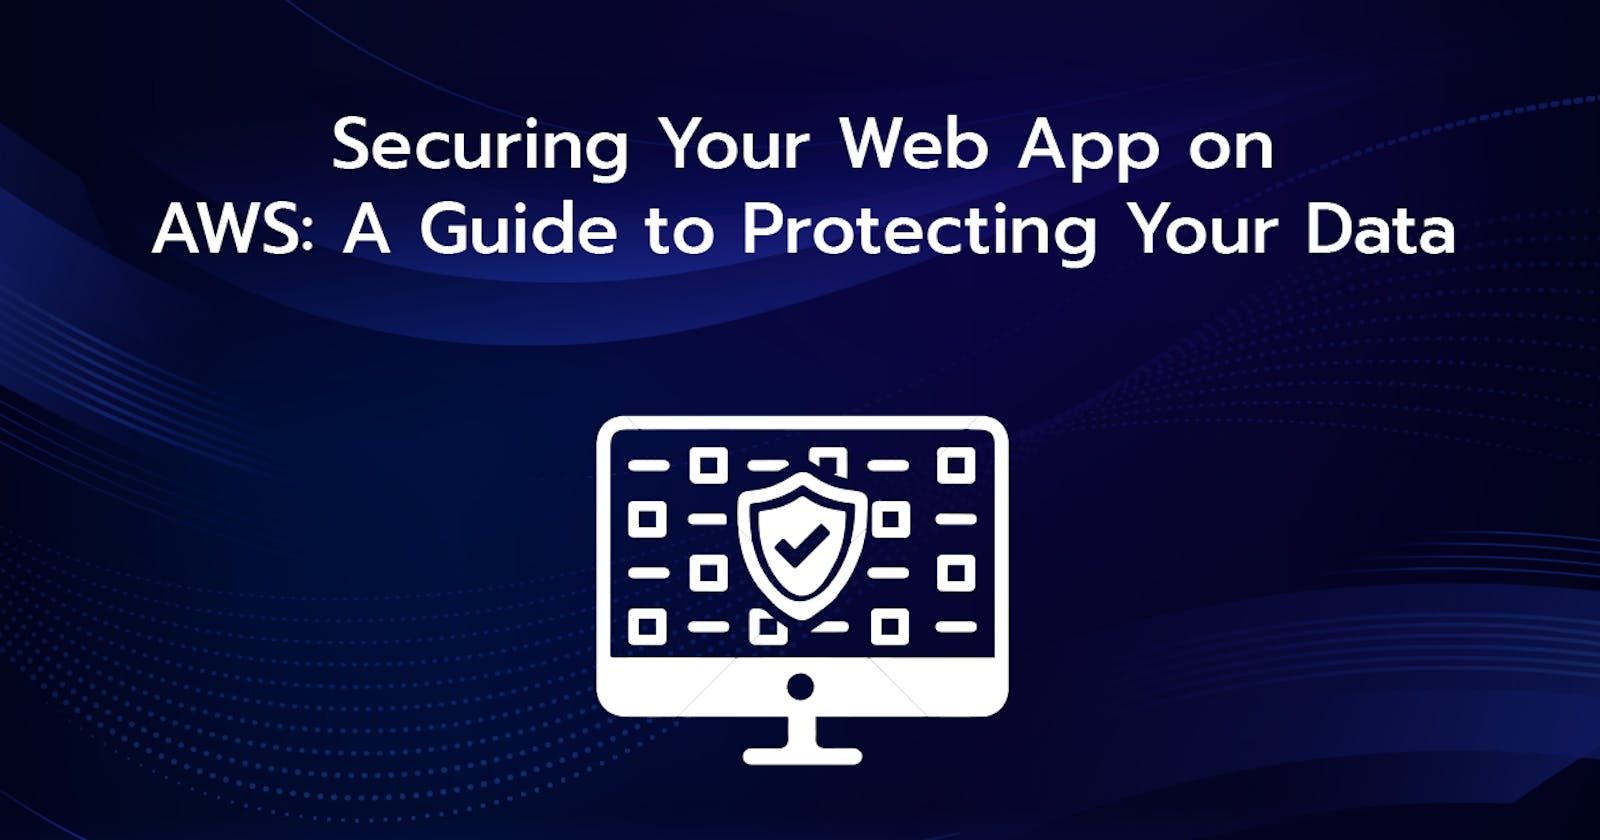 Securing Your Web App on AWS: A Guide to Protecting Your Data